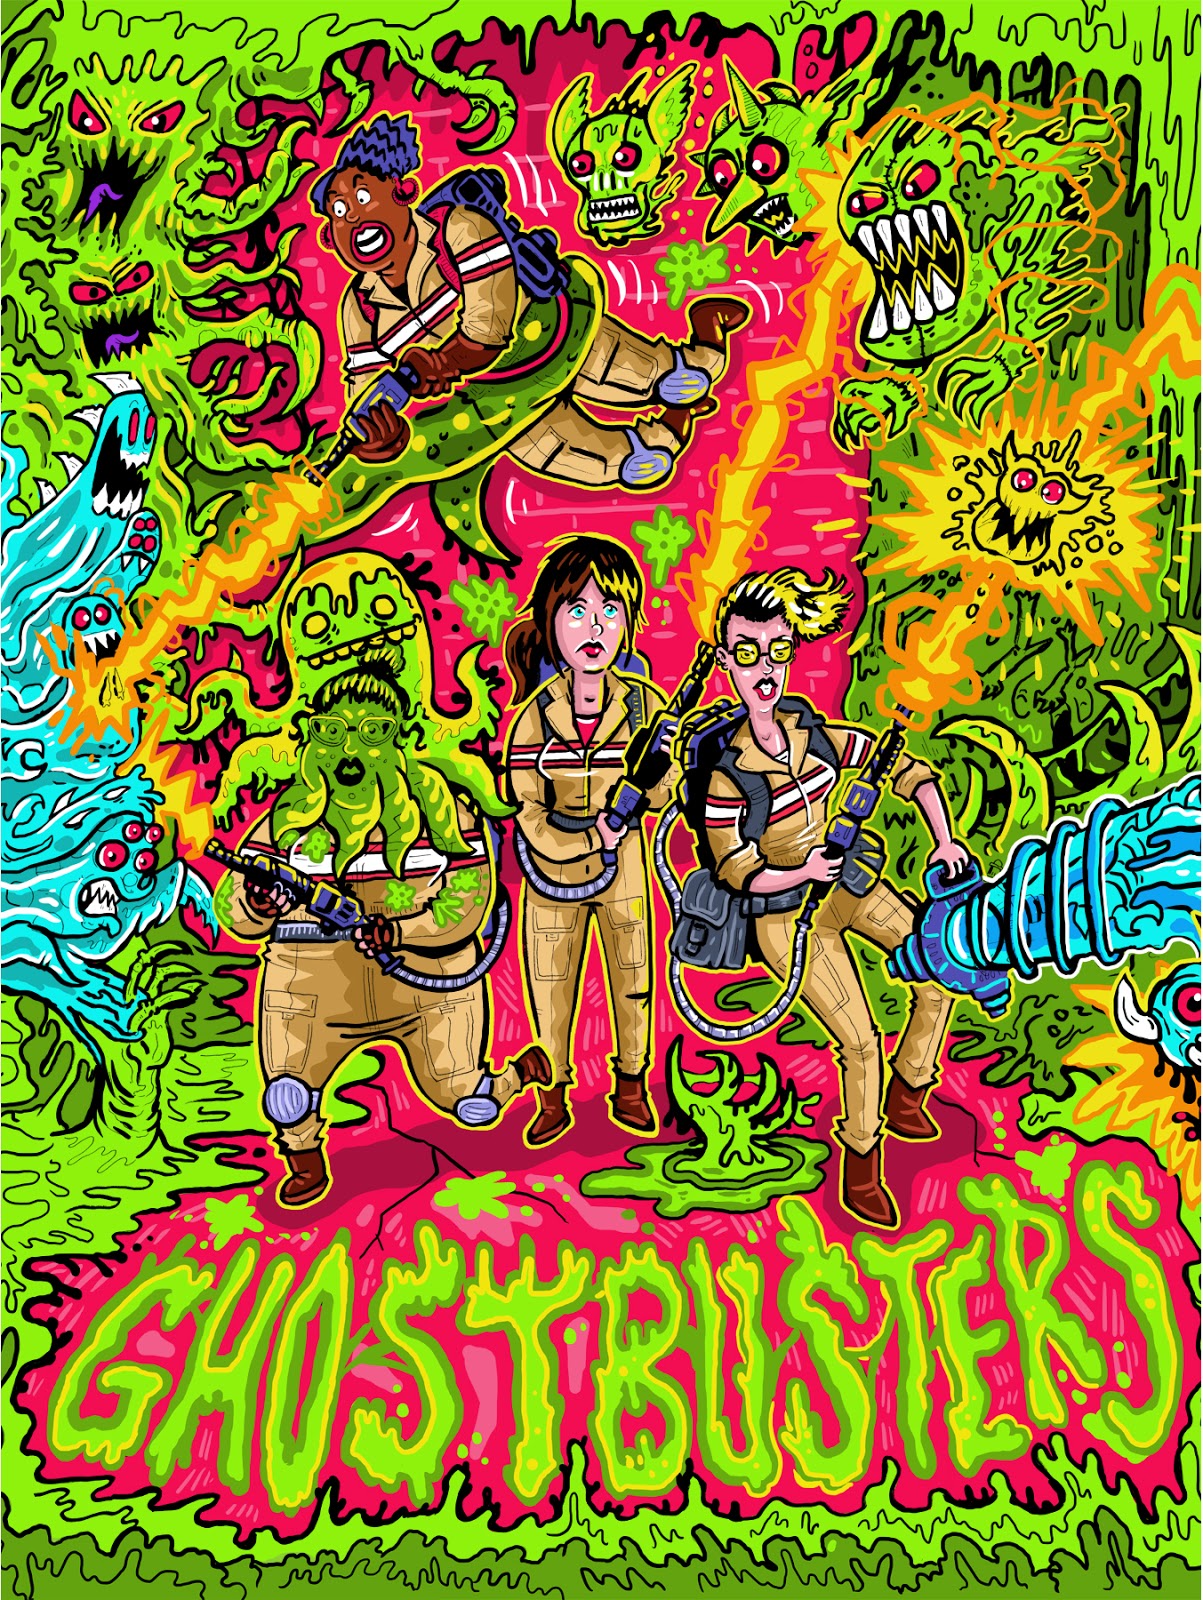 Pretty Weird Art: Ghostbusters posters by Ethan Mongin